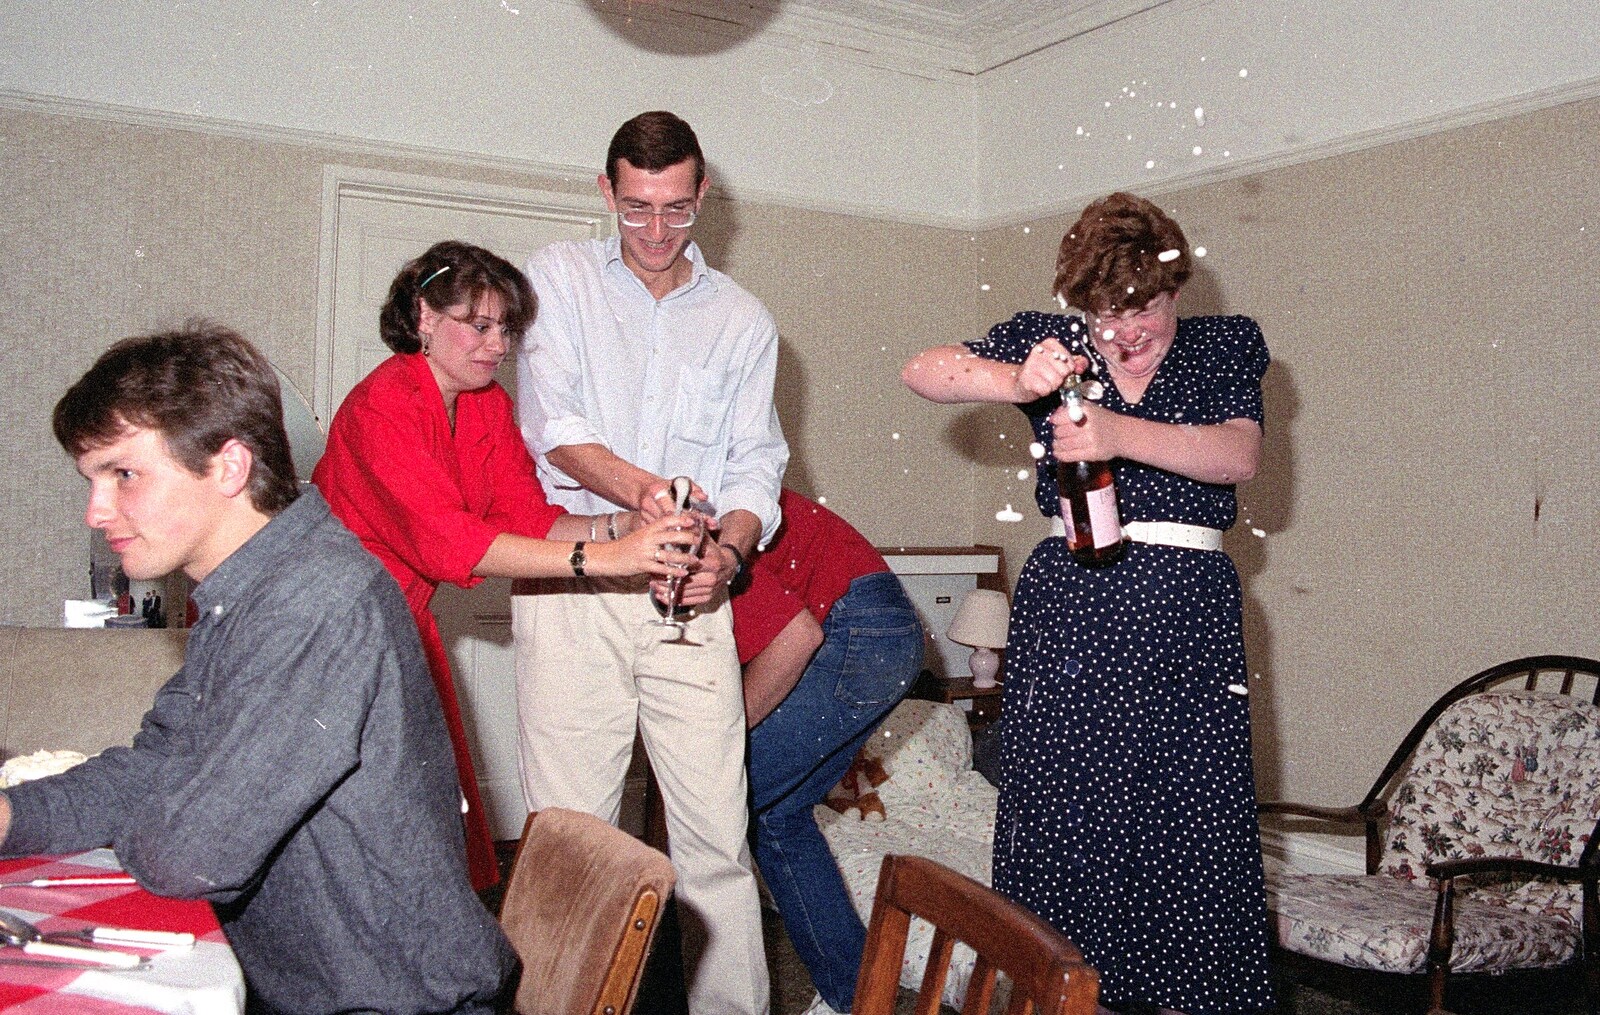 Kate uncorks a bottle of fizz from Uni: A Wyndham Square Economics Party, Stonehouse, Plymouth - 10th July 1989